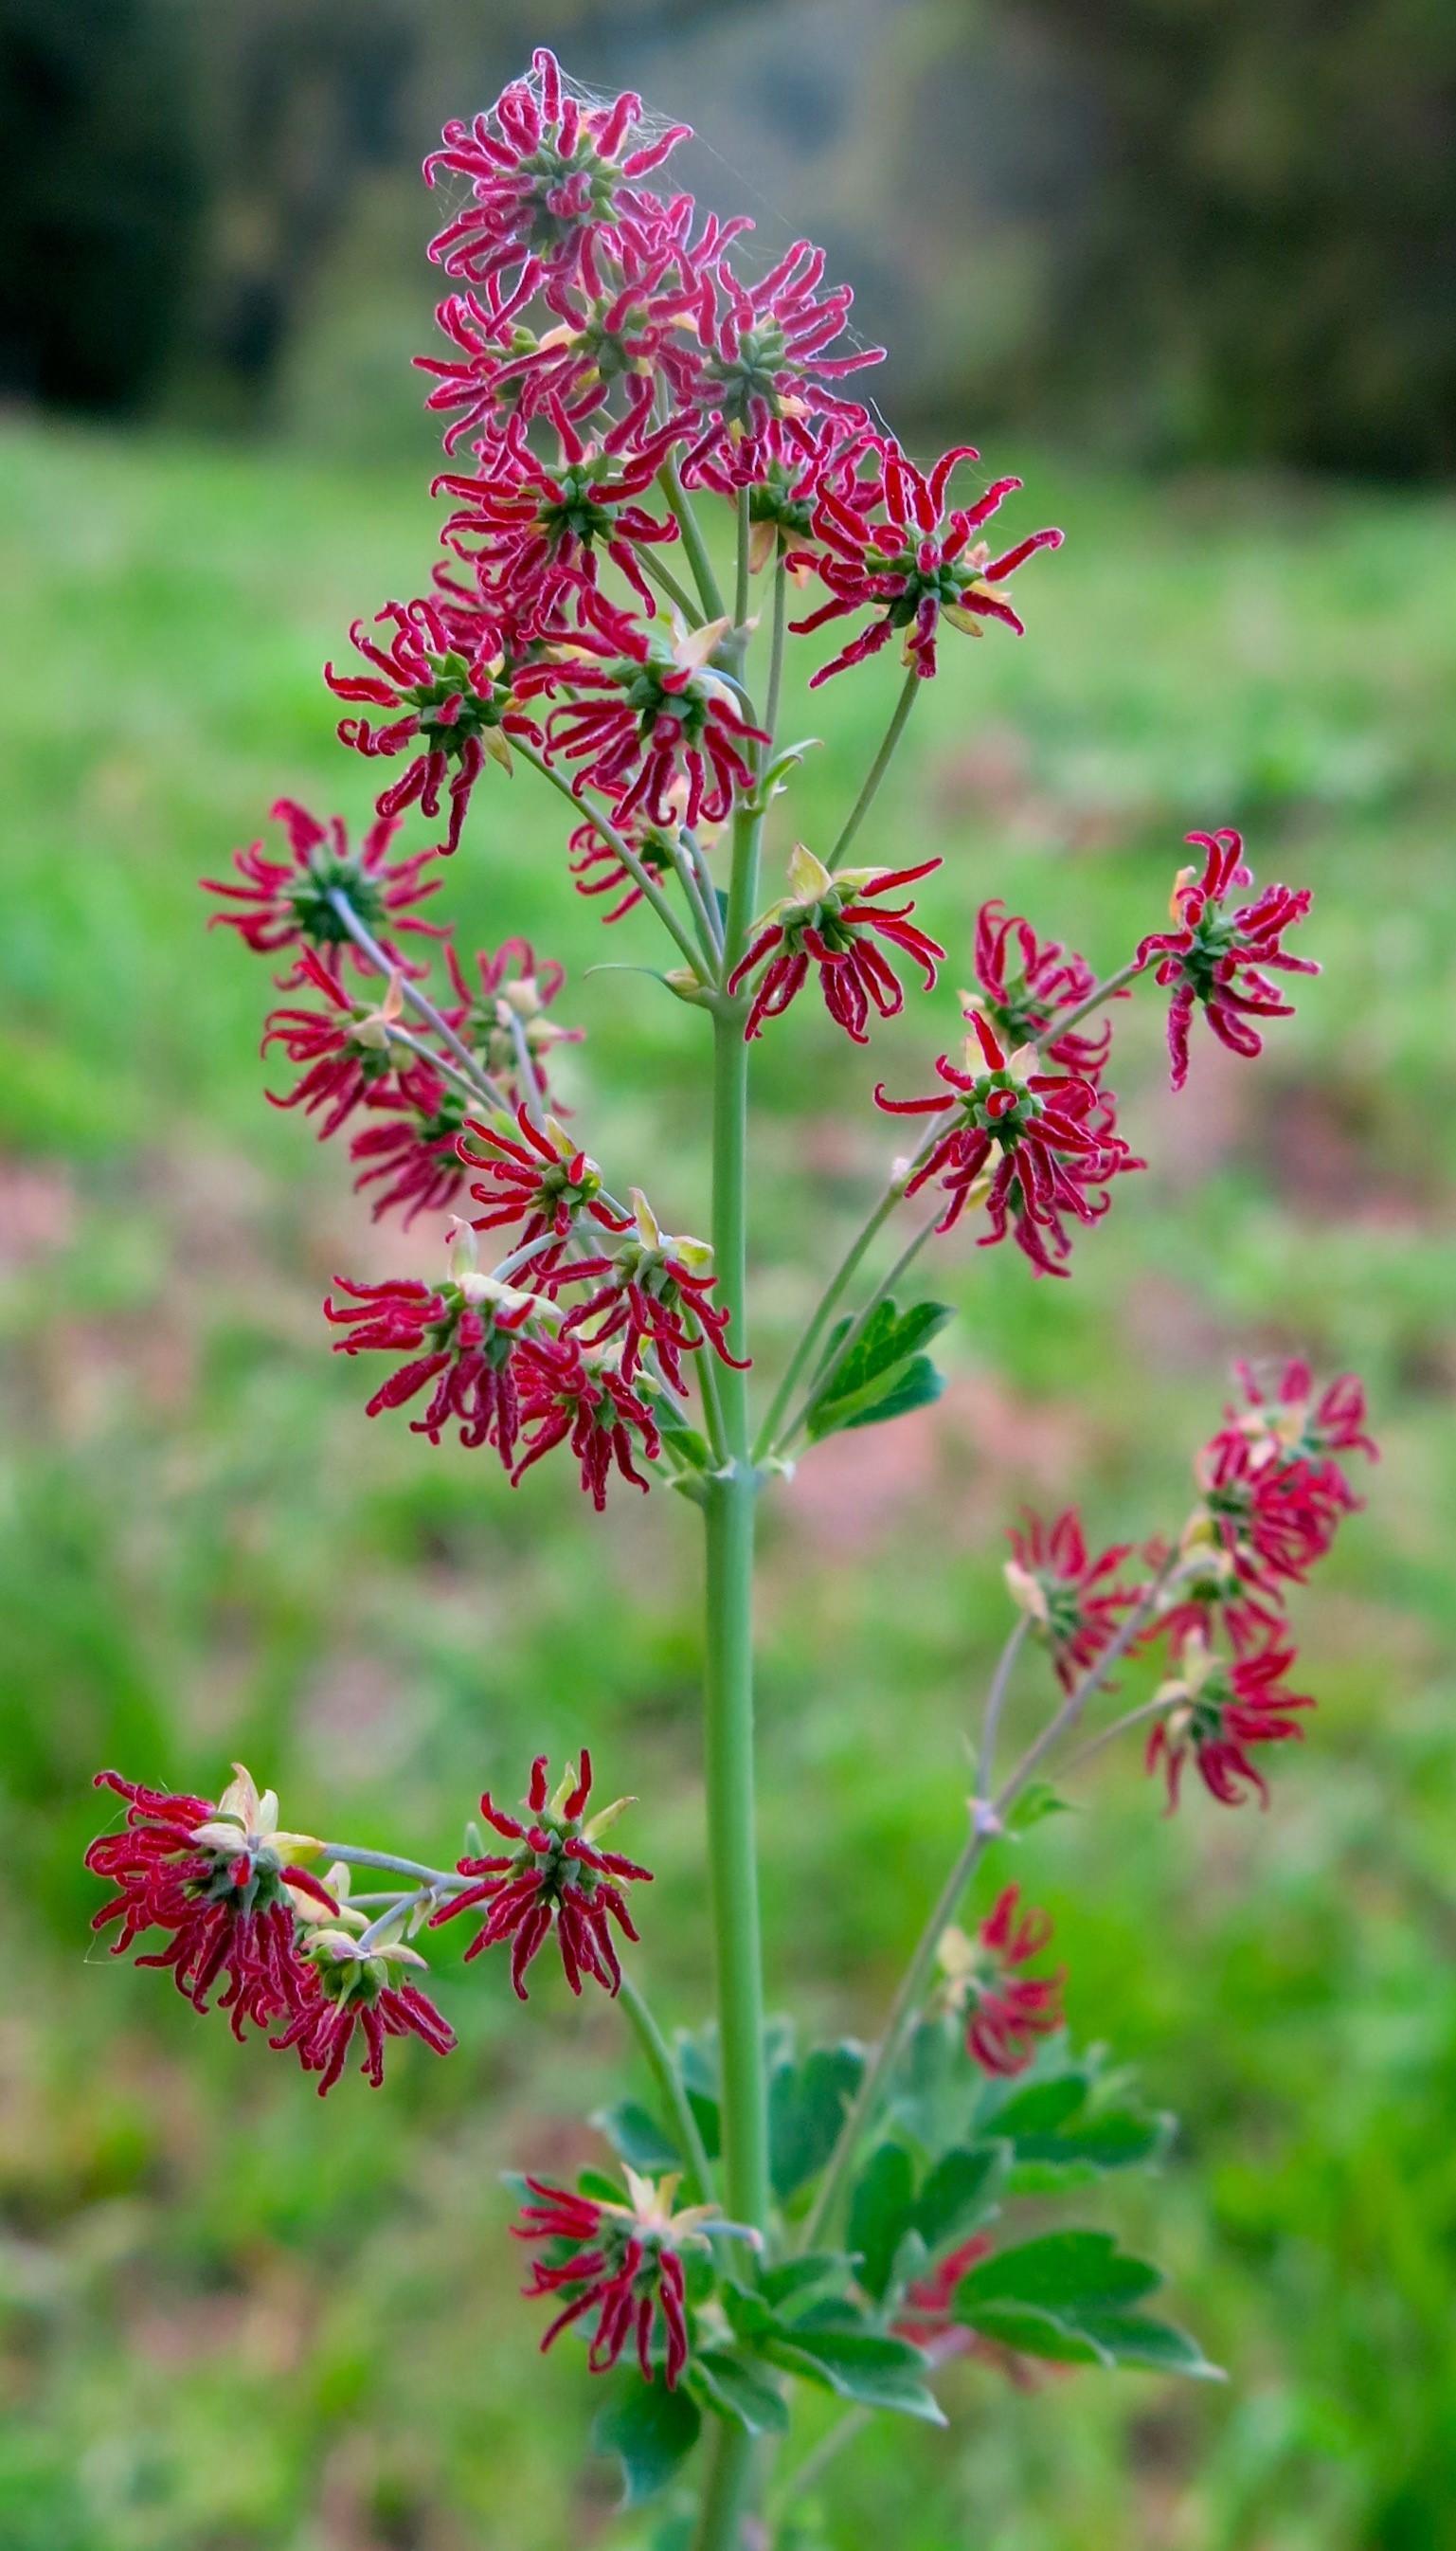 Frilly red flowers on stalk, grass in background